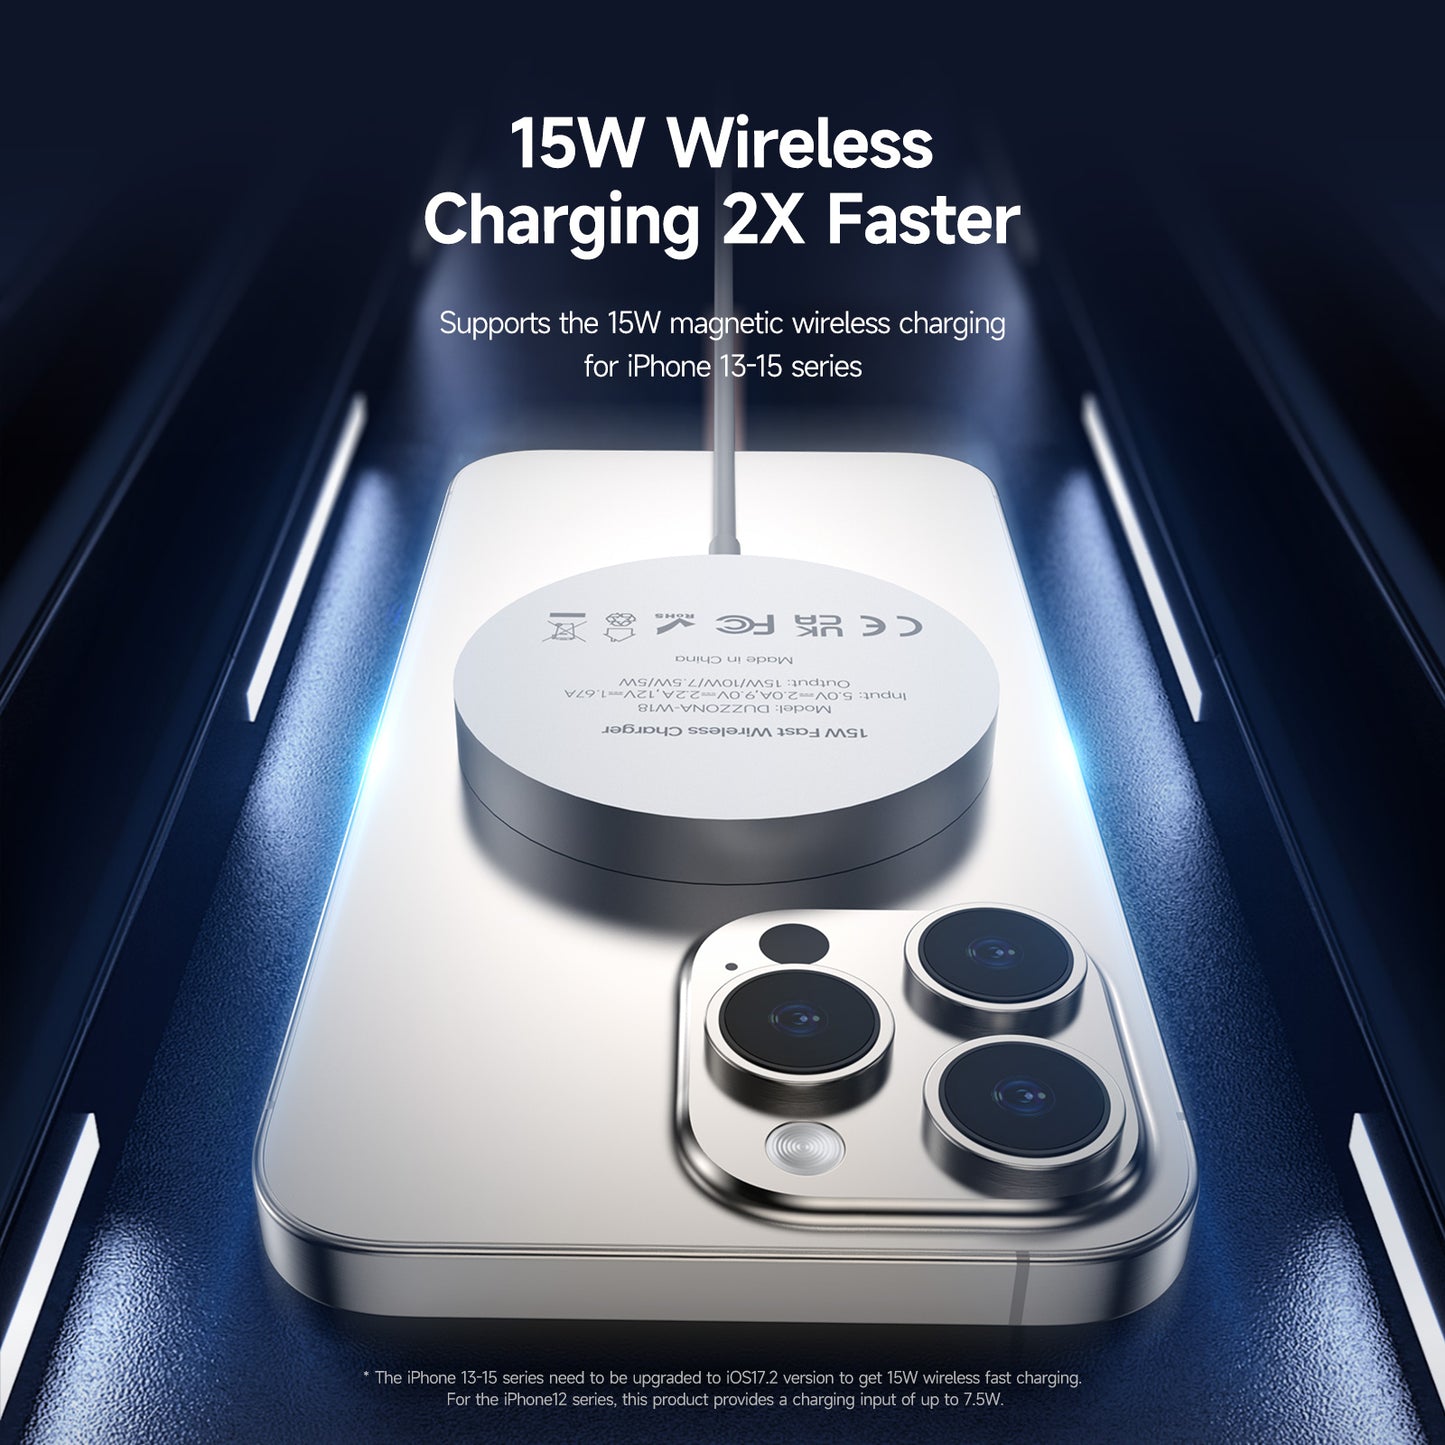 Qi2 15W Magnetic Wireless Charger